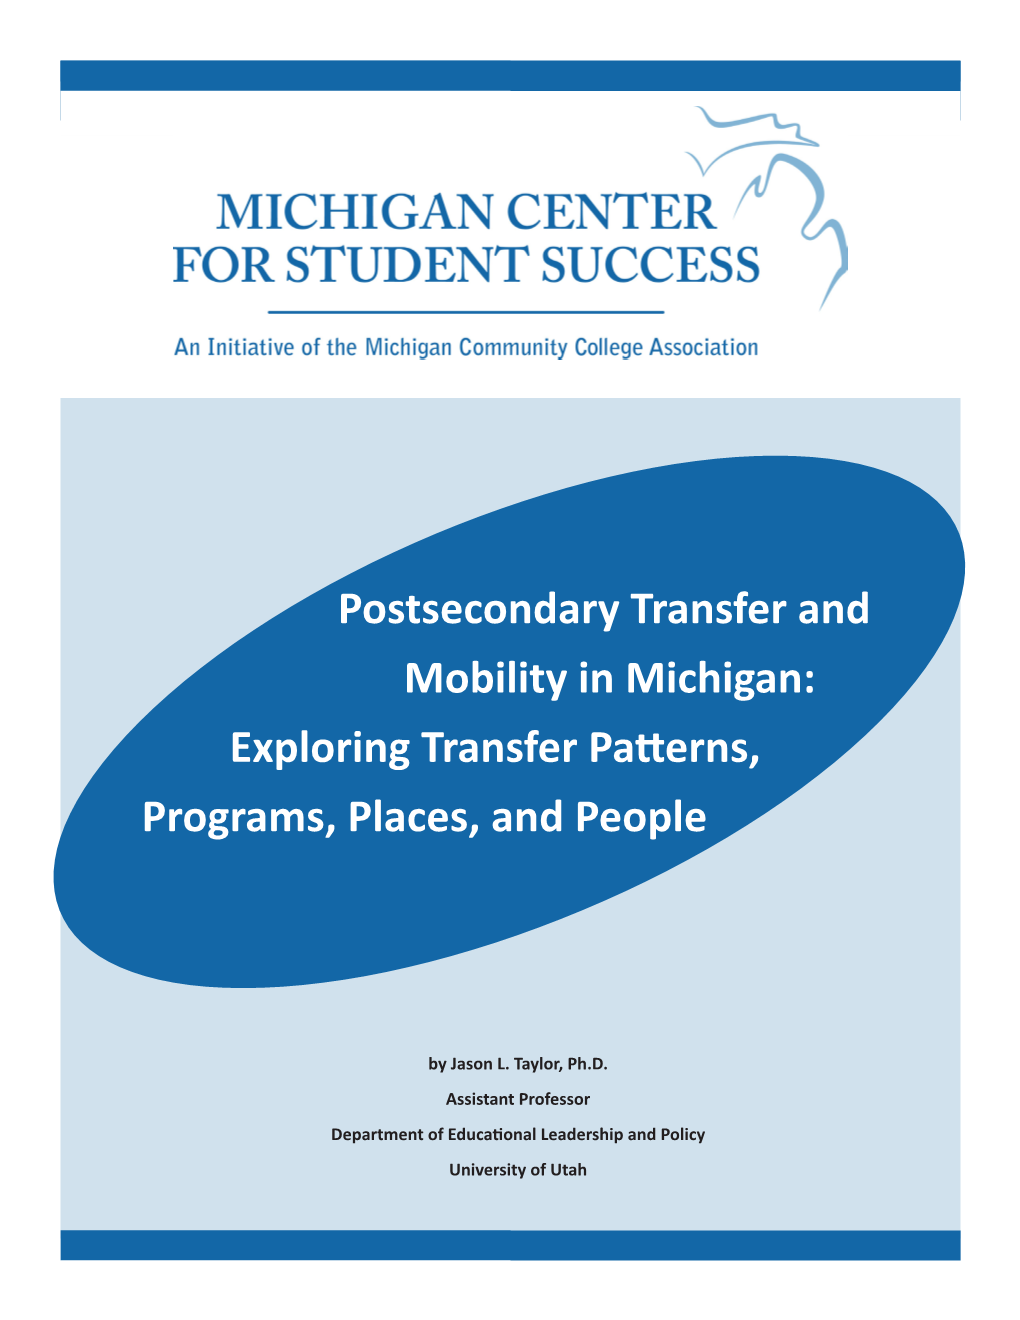 Postsecondary Transfer and Mobility in Michigan: 1 Exploring Transfer Patterns, Programs, Places, and People